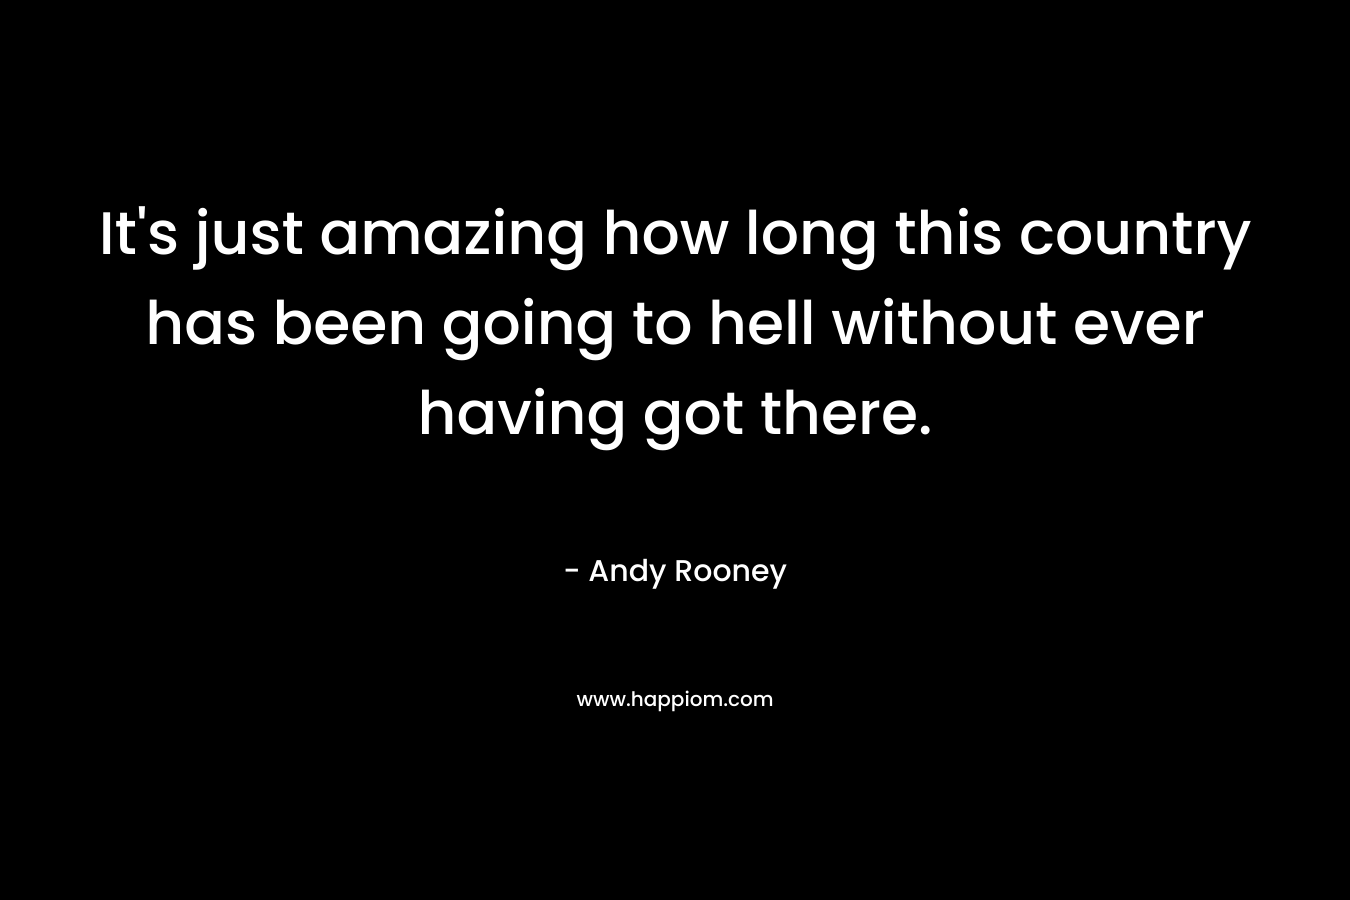 It’s just amazing how long this country has been going to hell without ever having got there. – Andy Rooney